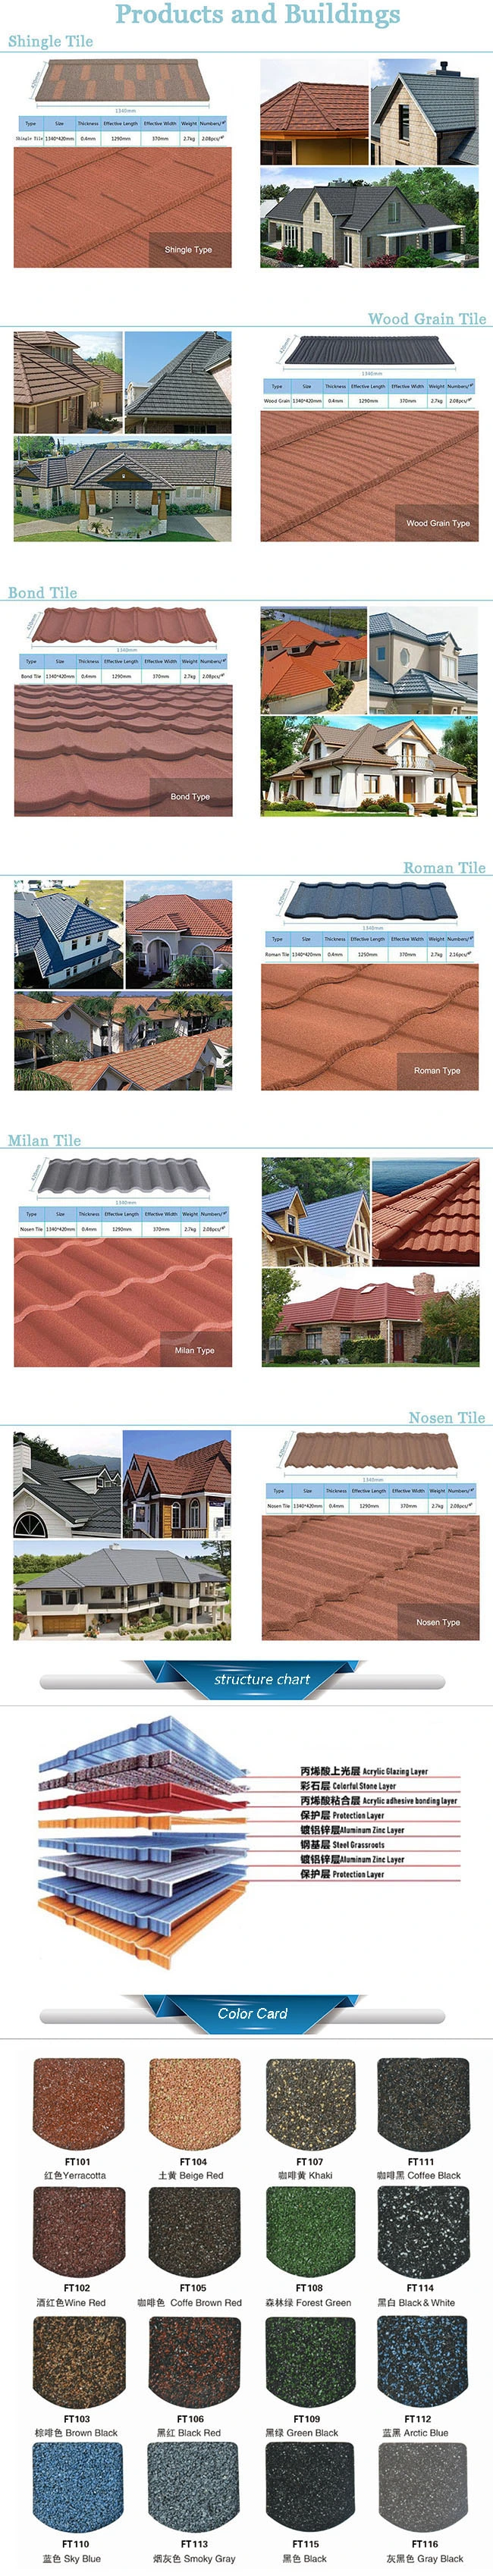 Stone Tile Building Materials Roofing Sheet Roofing Materials Roof Tile